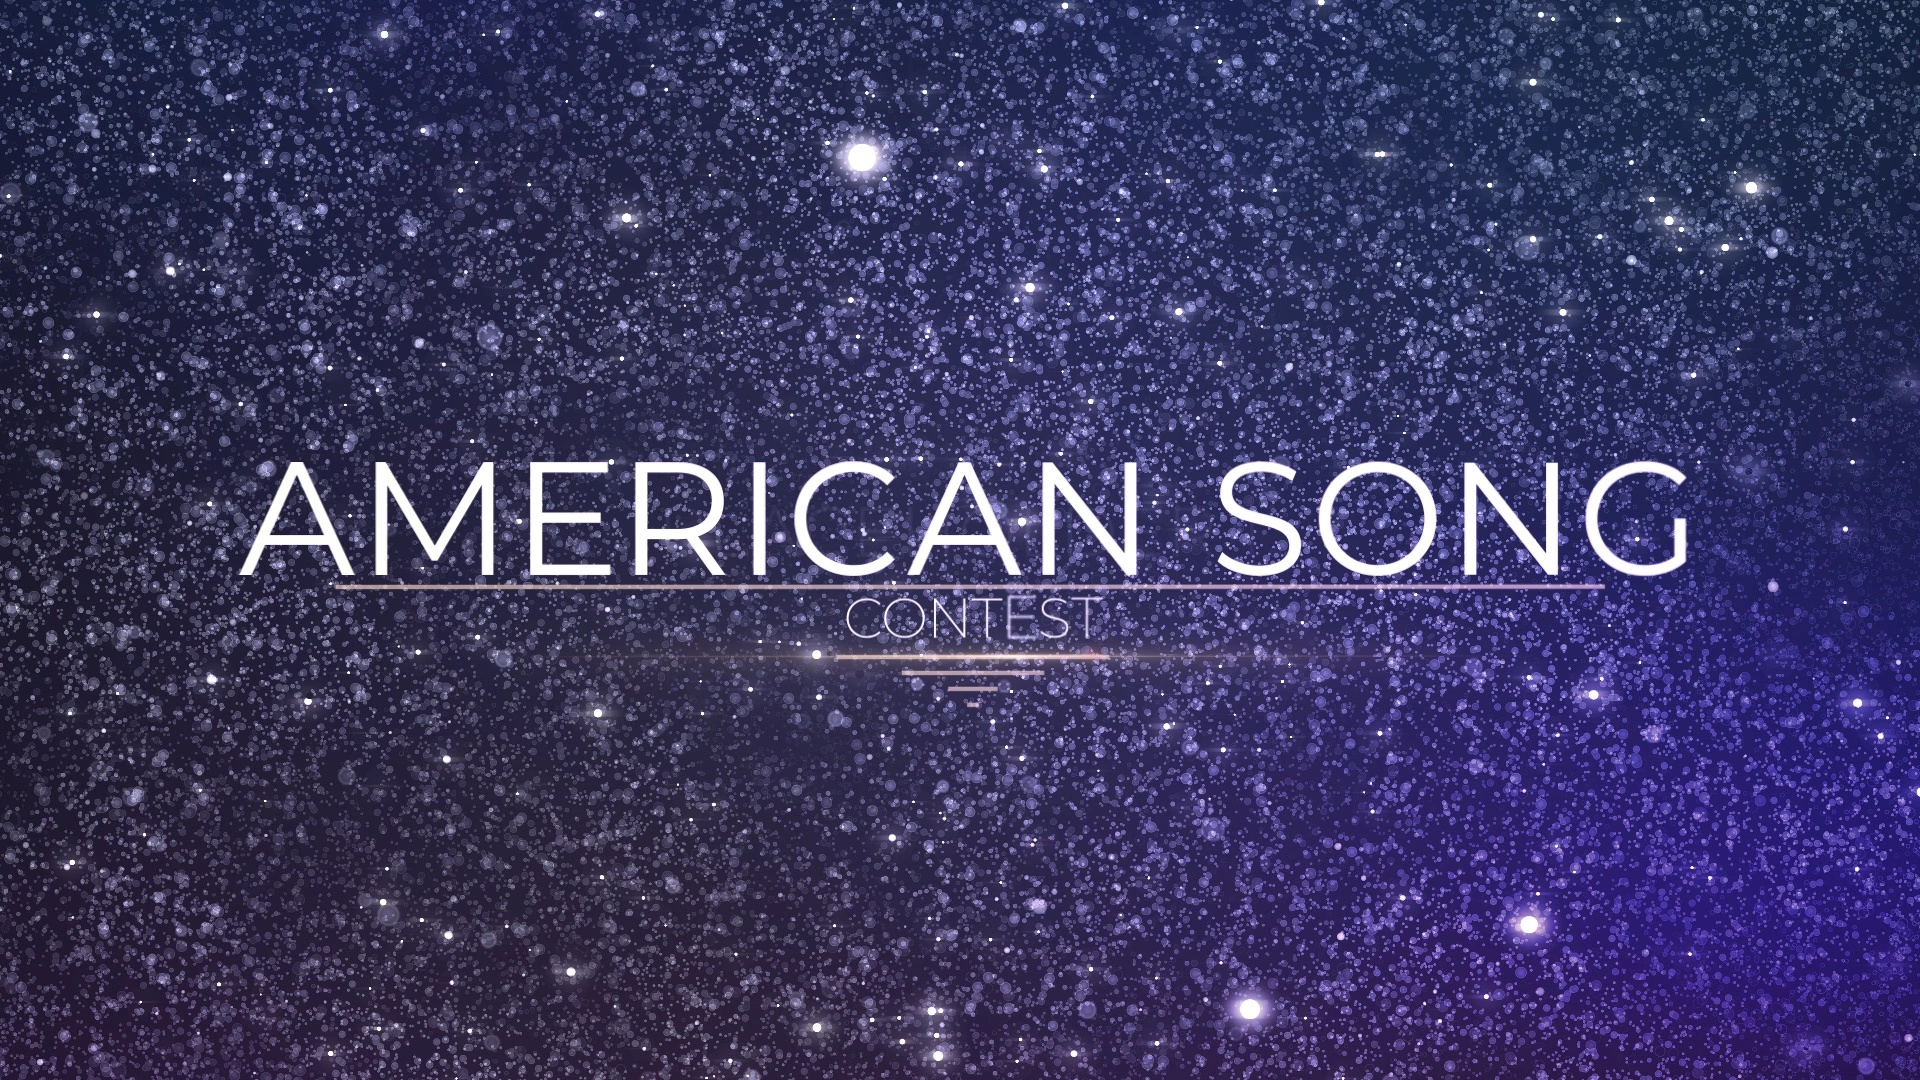 American Song Contest, Eurovision inspiration, Submissions open, Musical variety, 1920x1080 Full HD Desktop